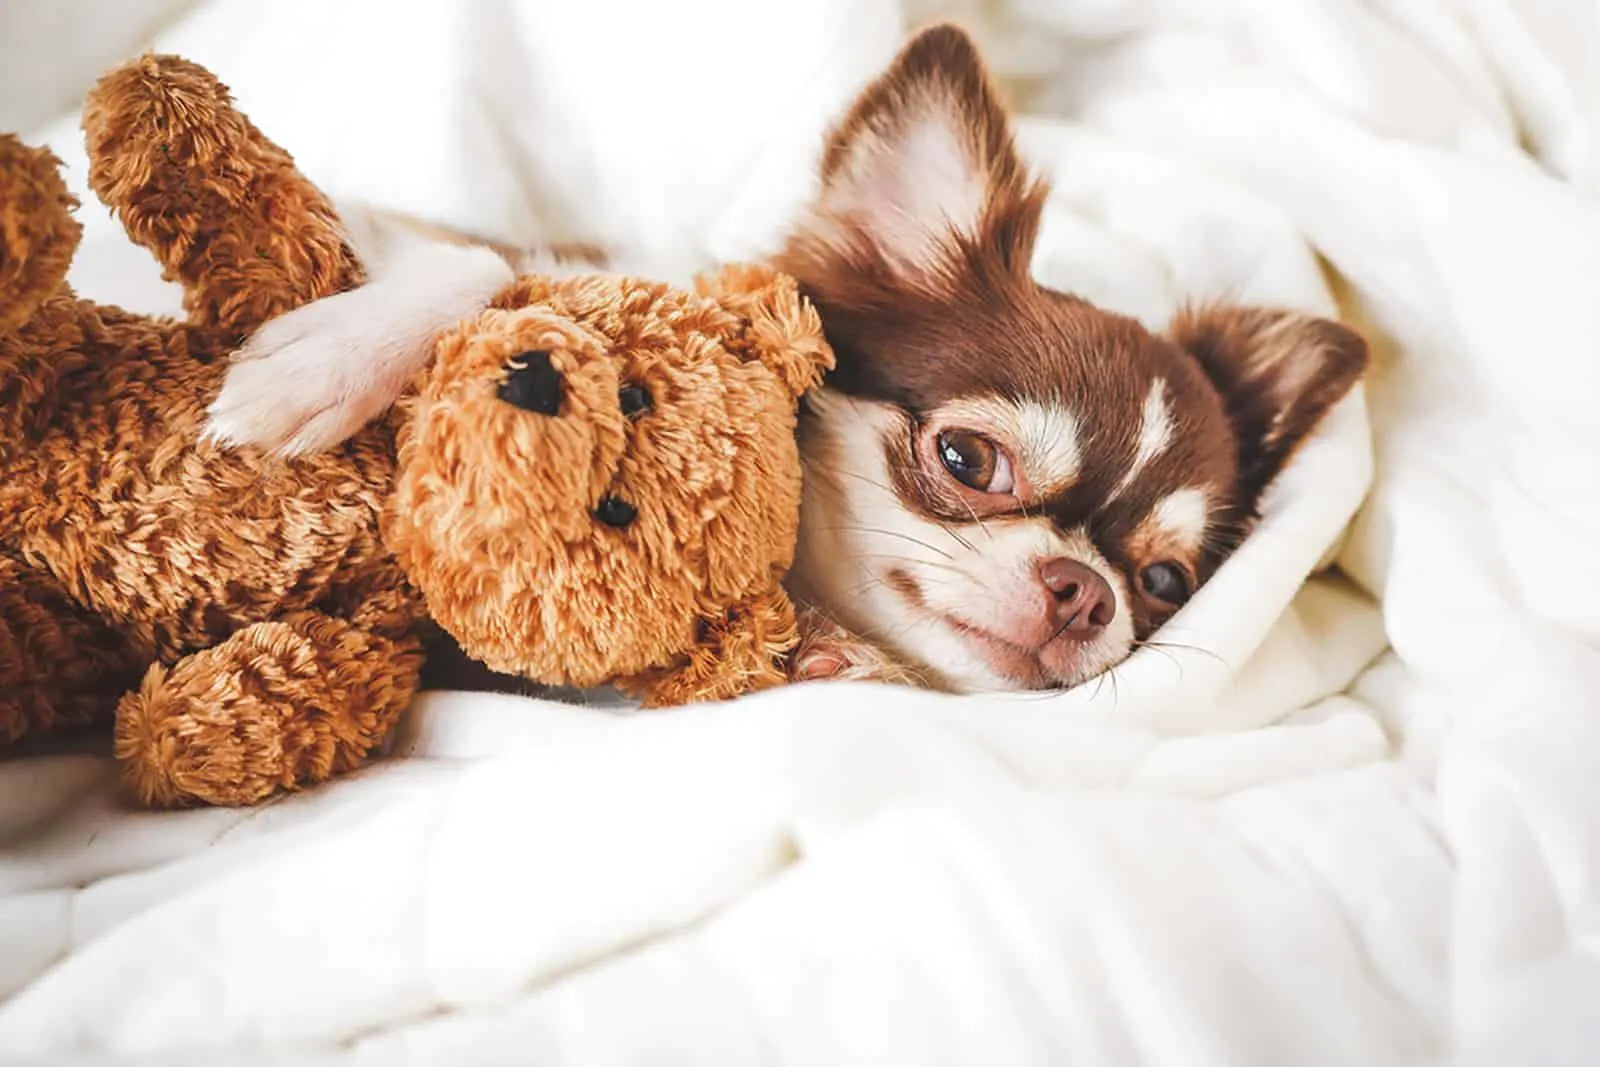 chihuahua puppy sleeping with teddy bear on the bed